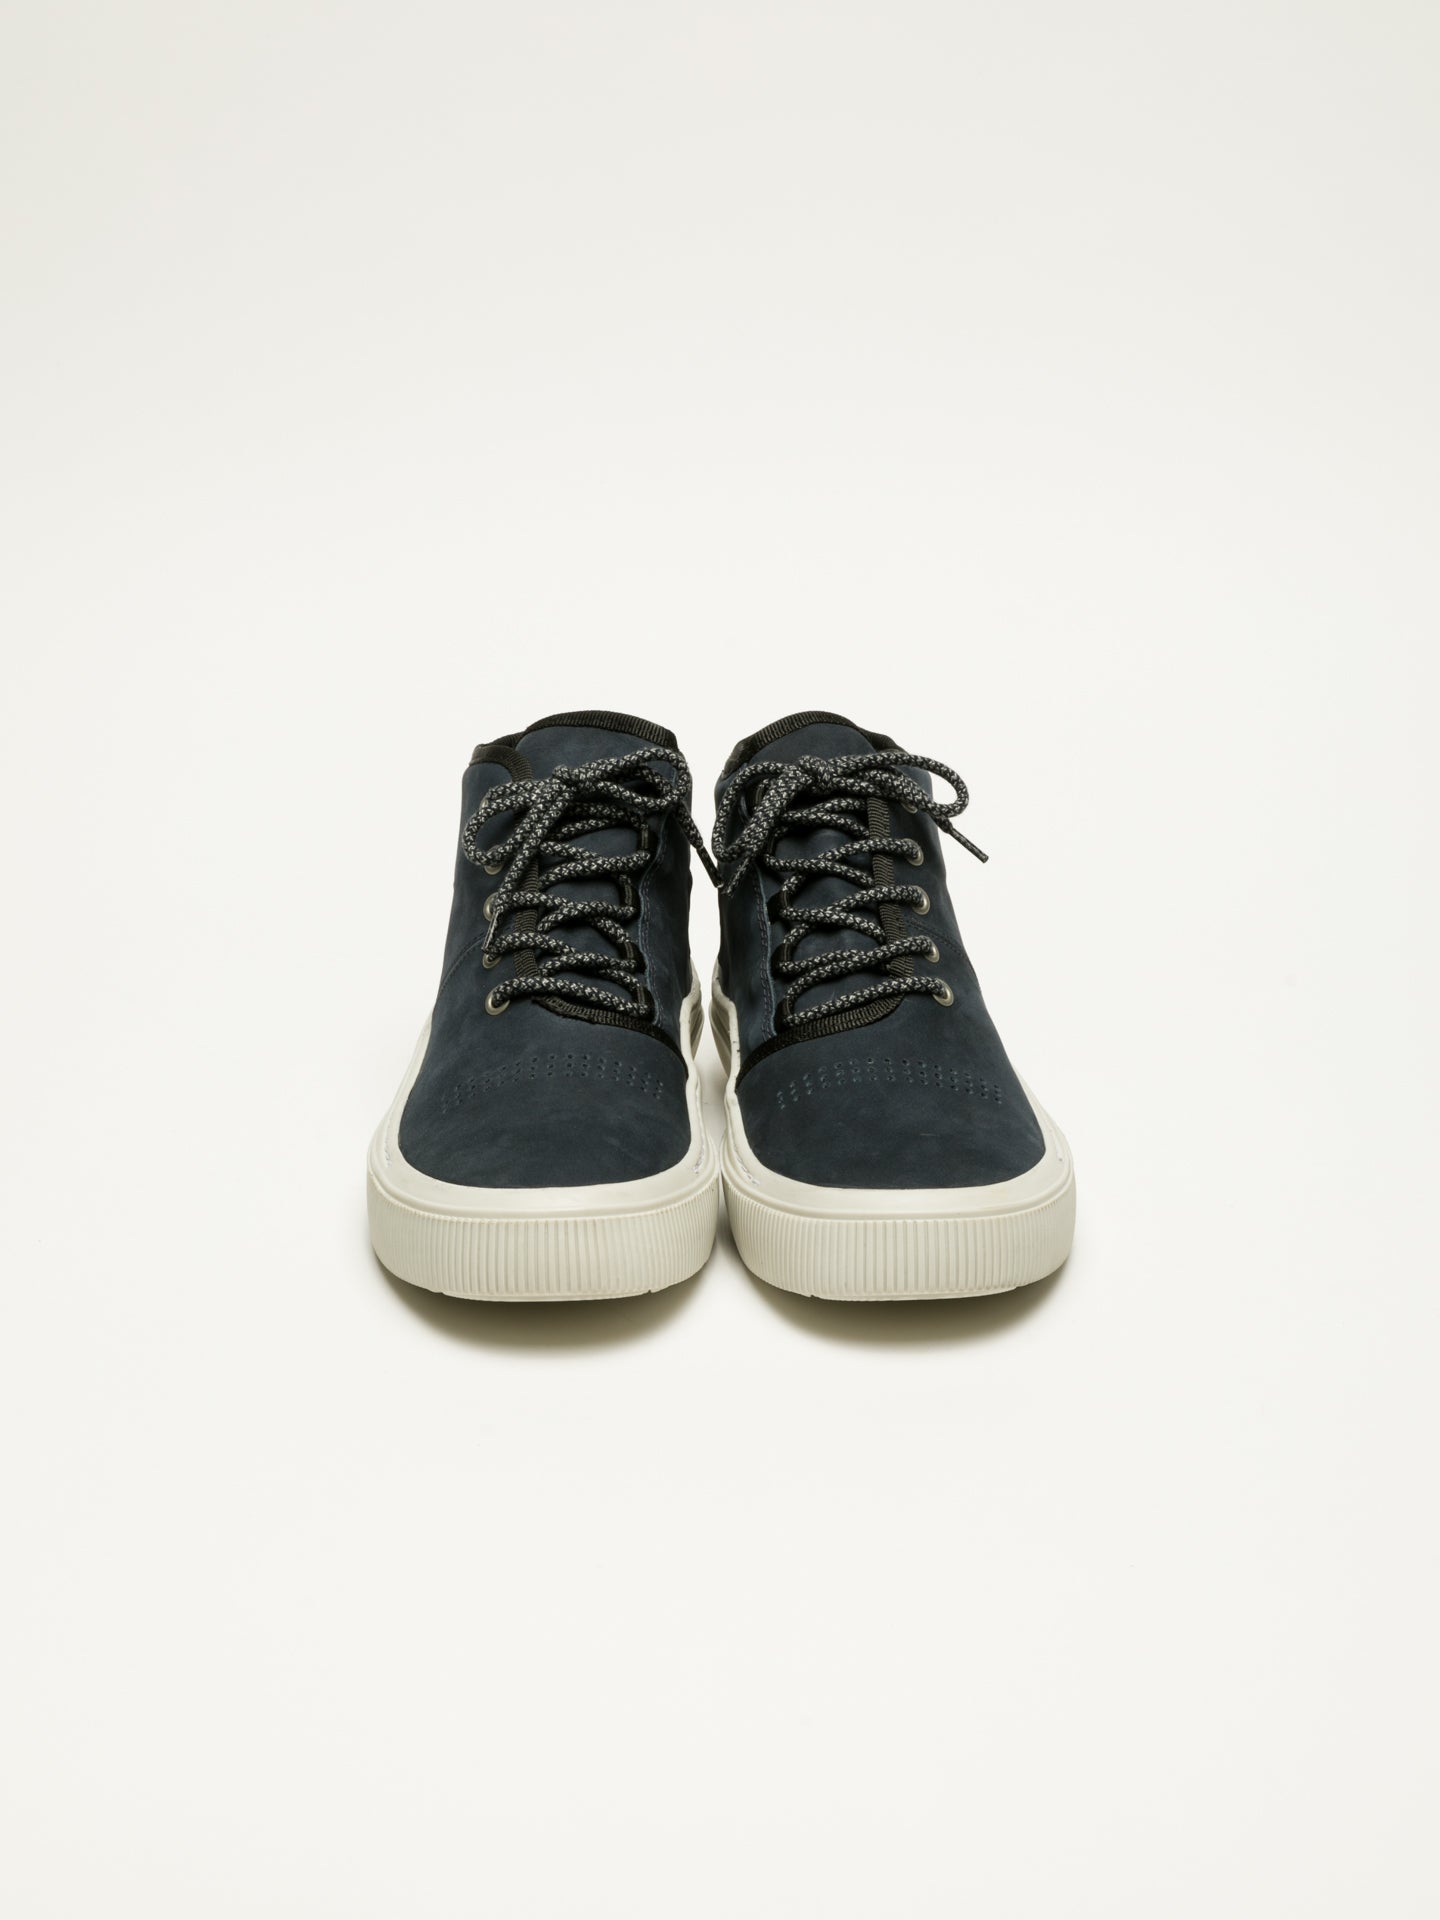 Fly London Navy Hi-Top Trainers